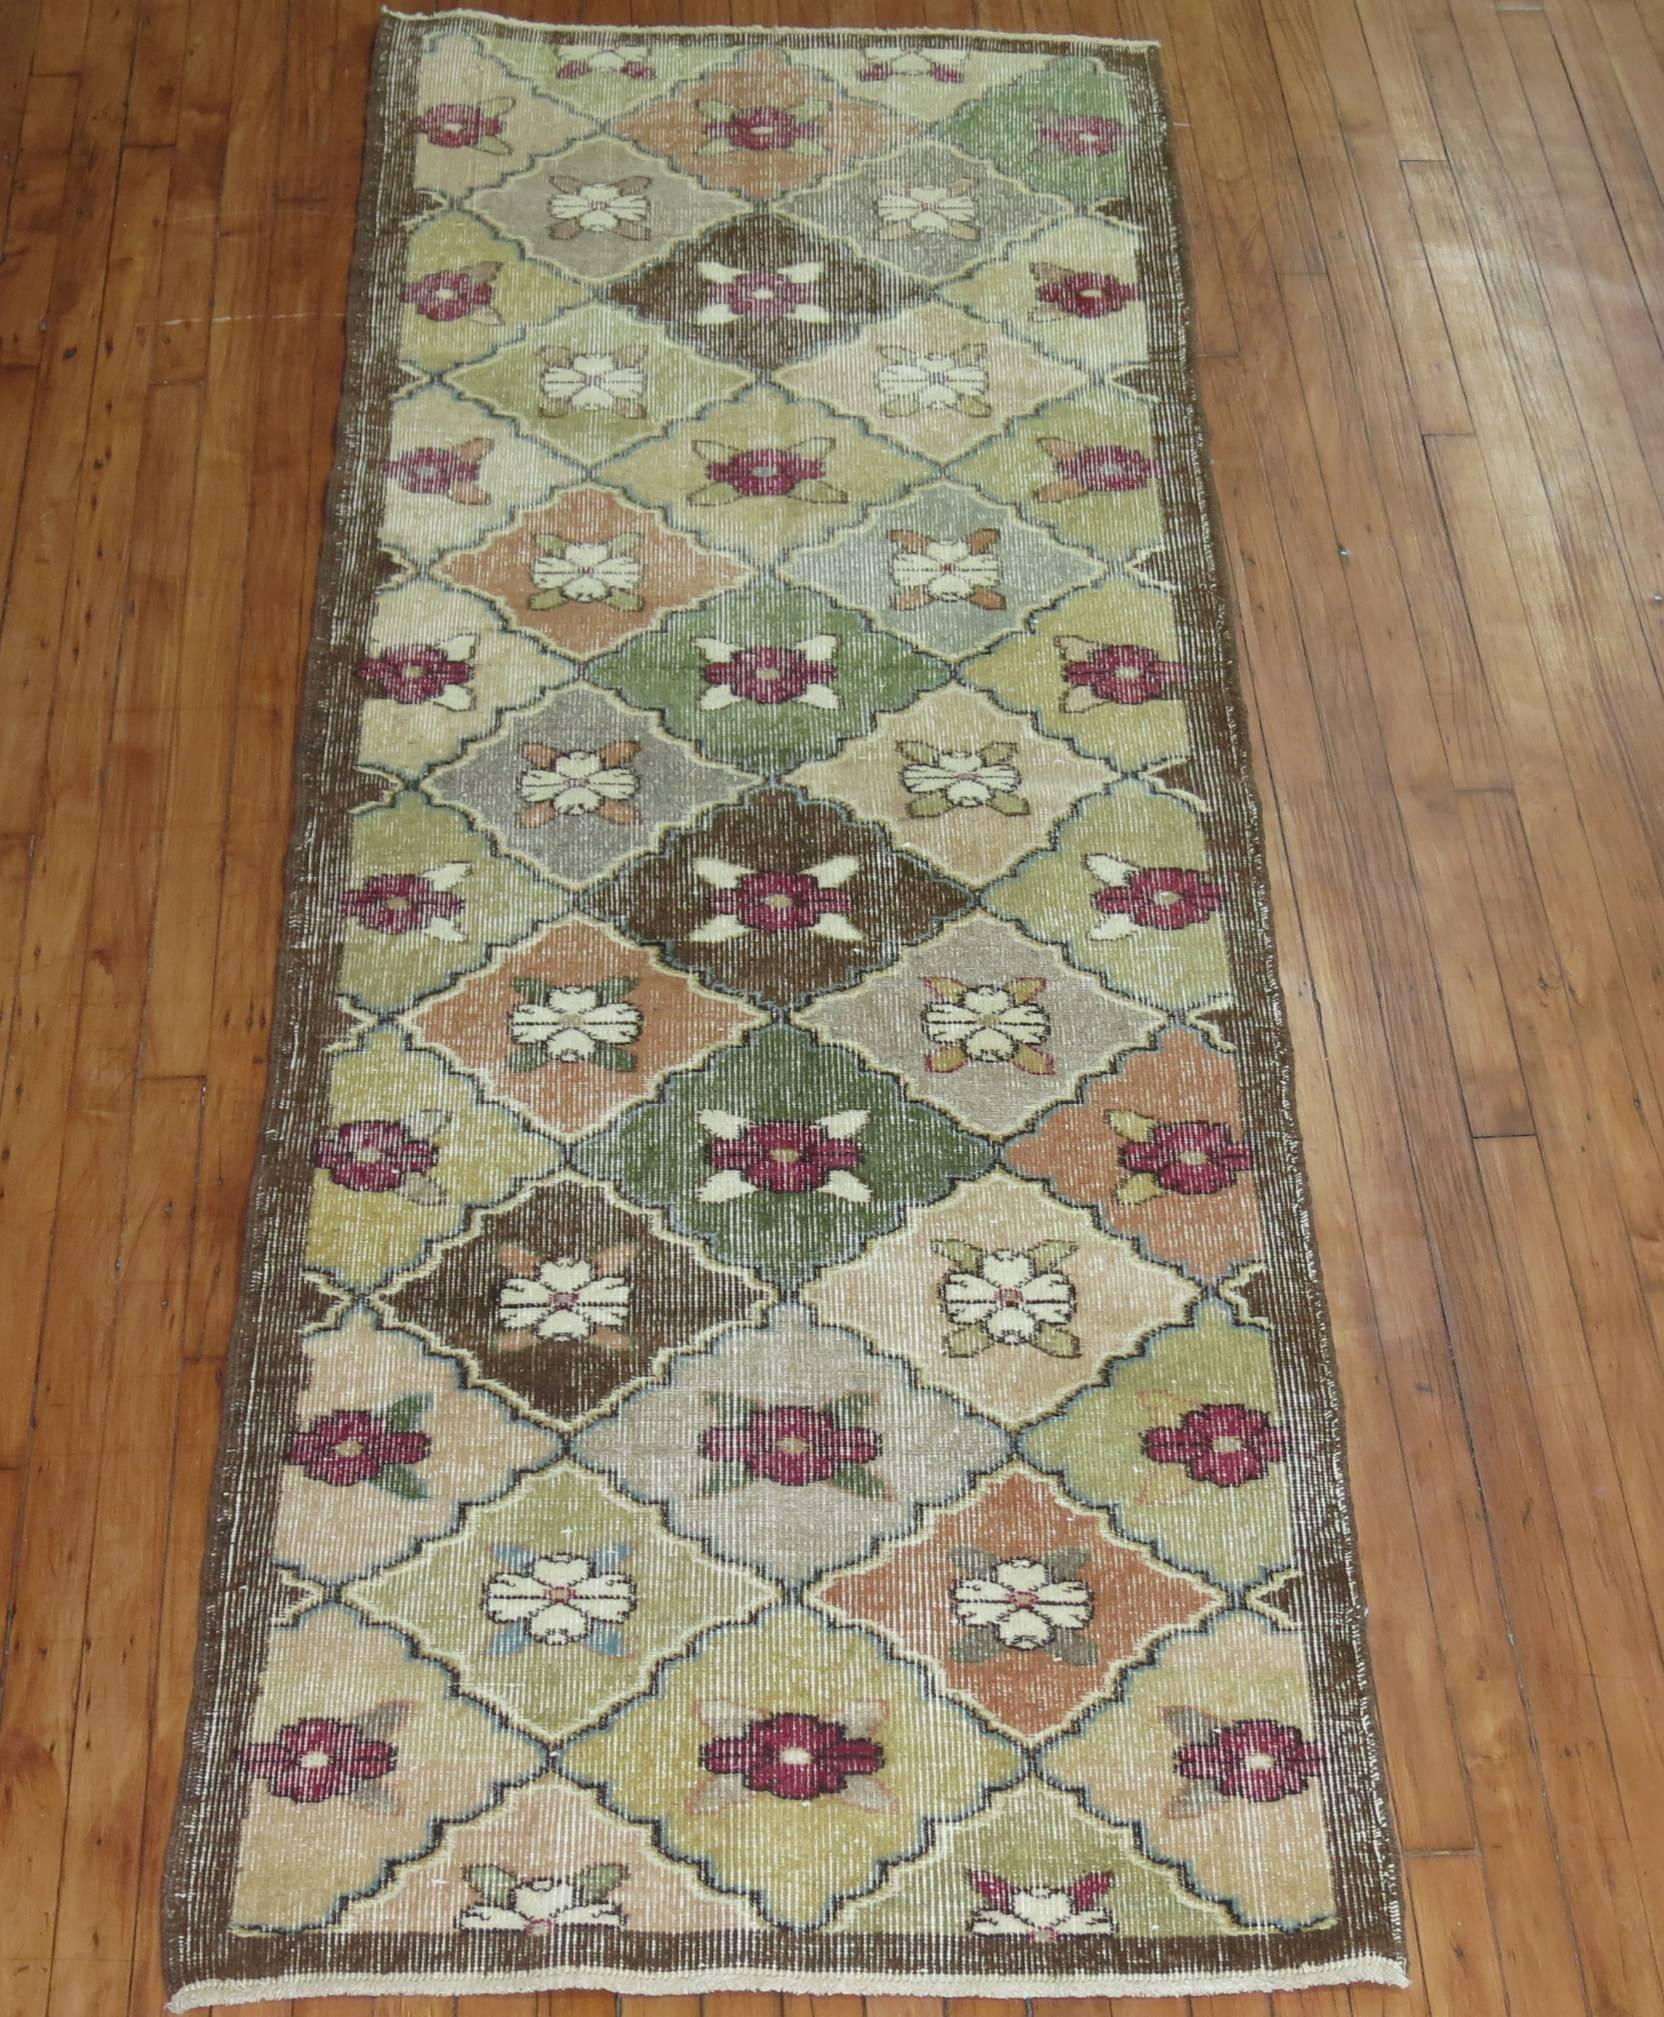 Shabby chic Turkish deco runner a floral all-over design surrounded by a solid brown border

Measures: 3' x 8'3